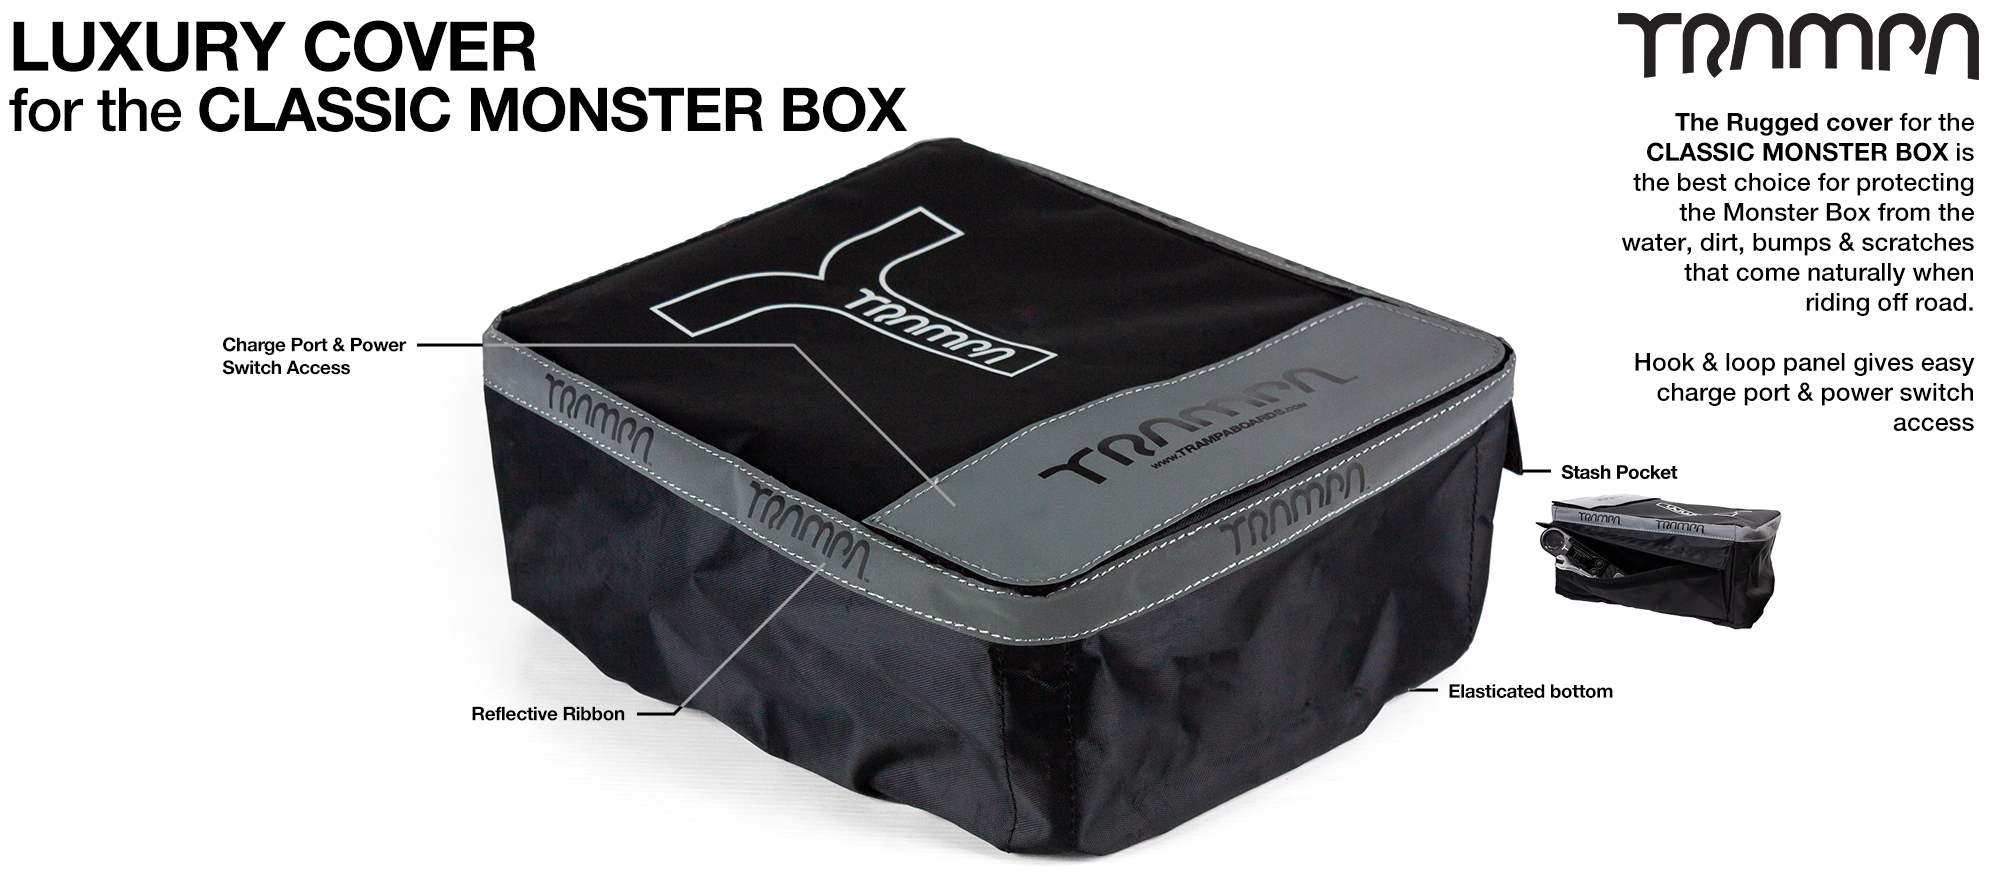 HEAVY DUTY Luxury CLASSIC Monster Box protective Cover with Tool or Stash Pockets & Inspection pit for easy access to charging